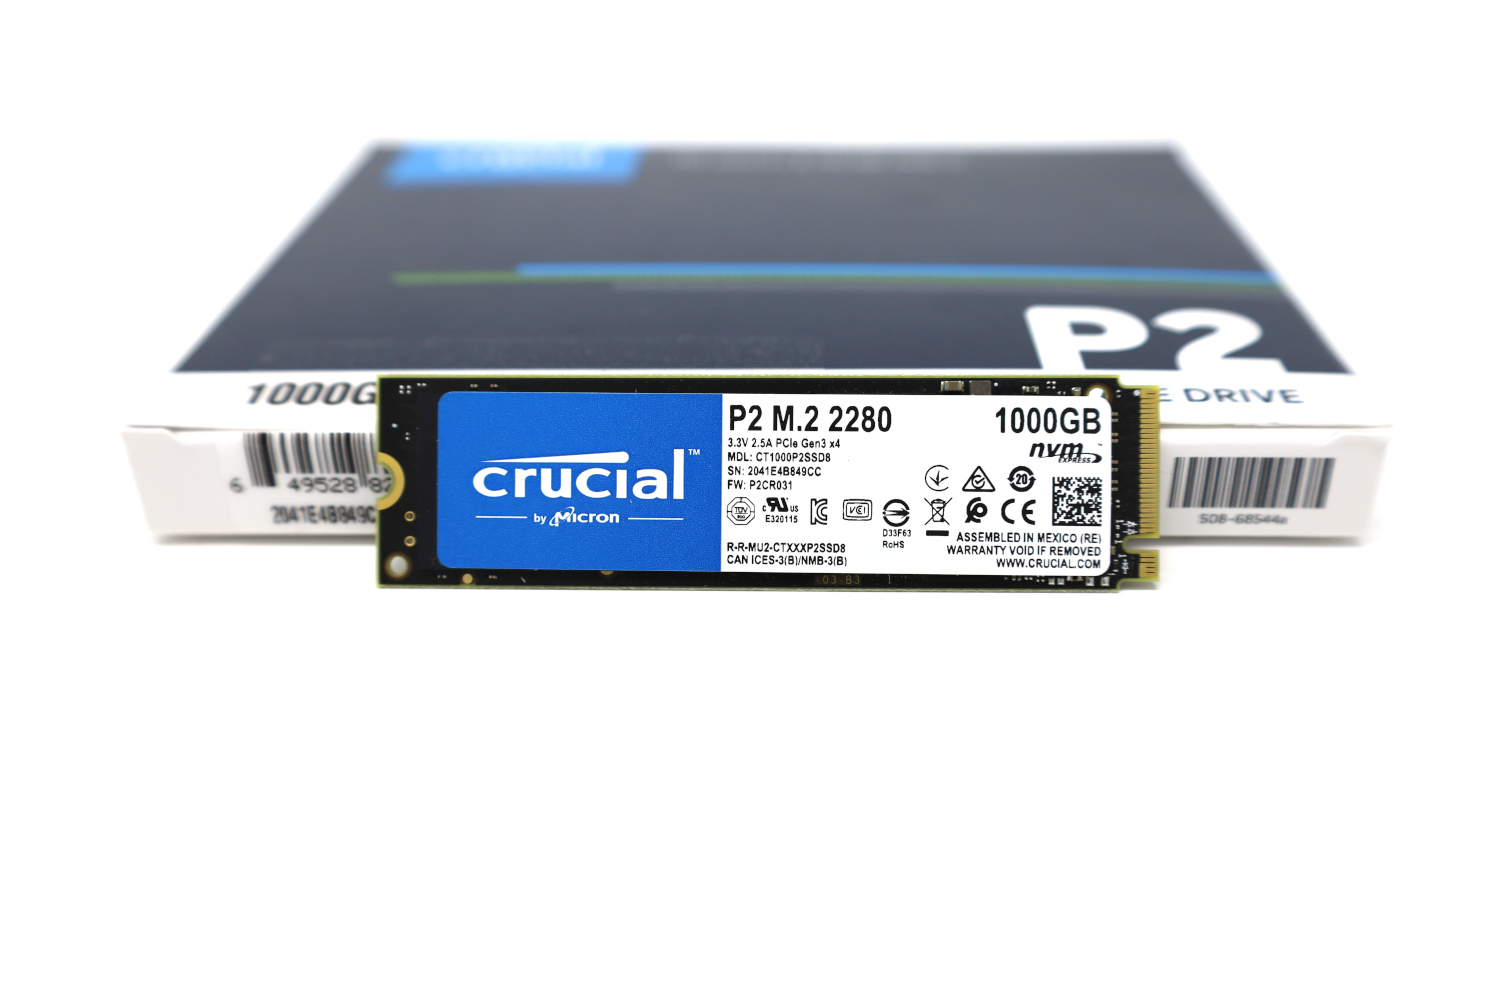 Crucial P2 1TB PCIe Gen3 NVMe M.2 SSD Review - Page 3 of 3 